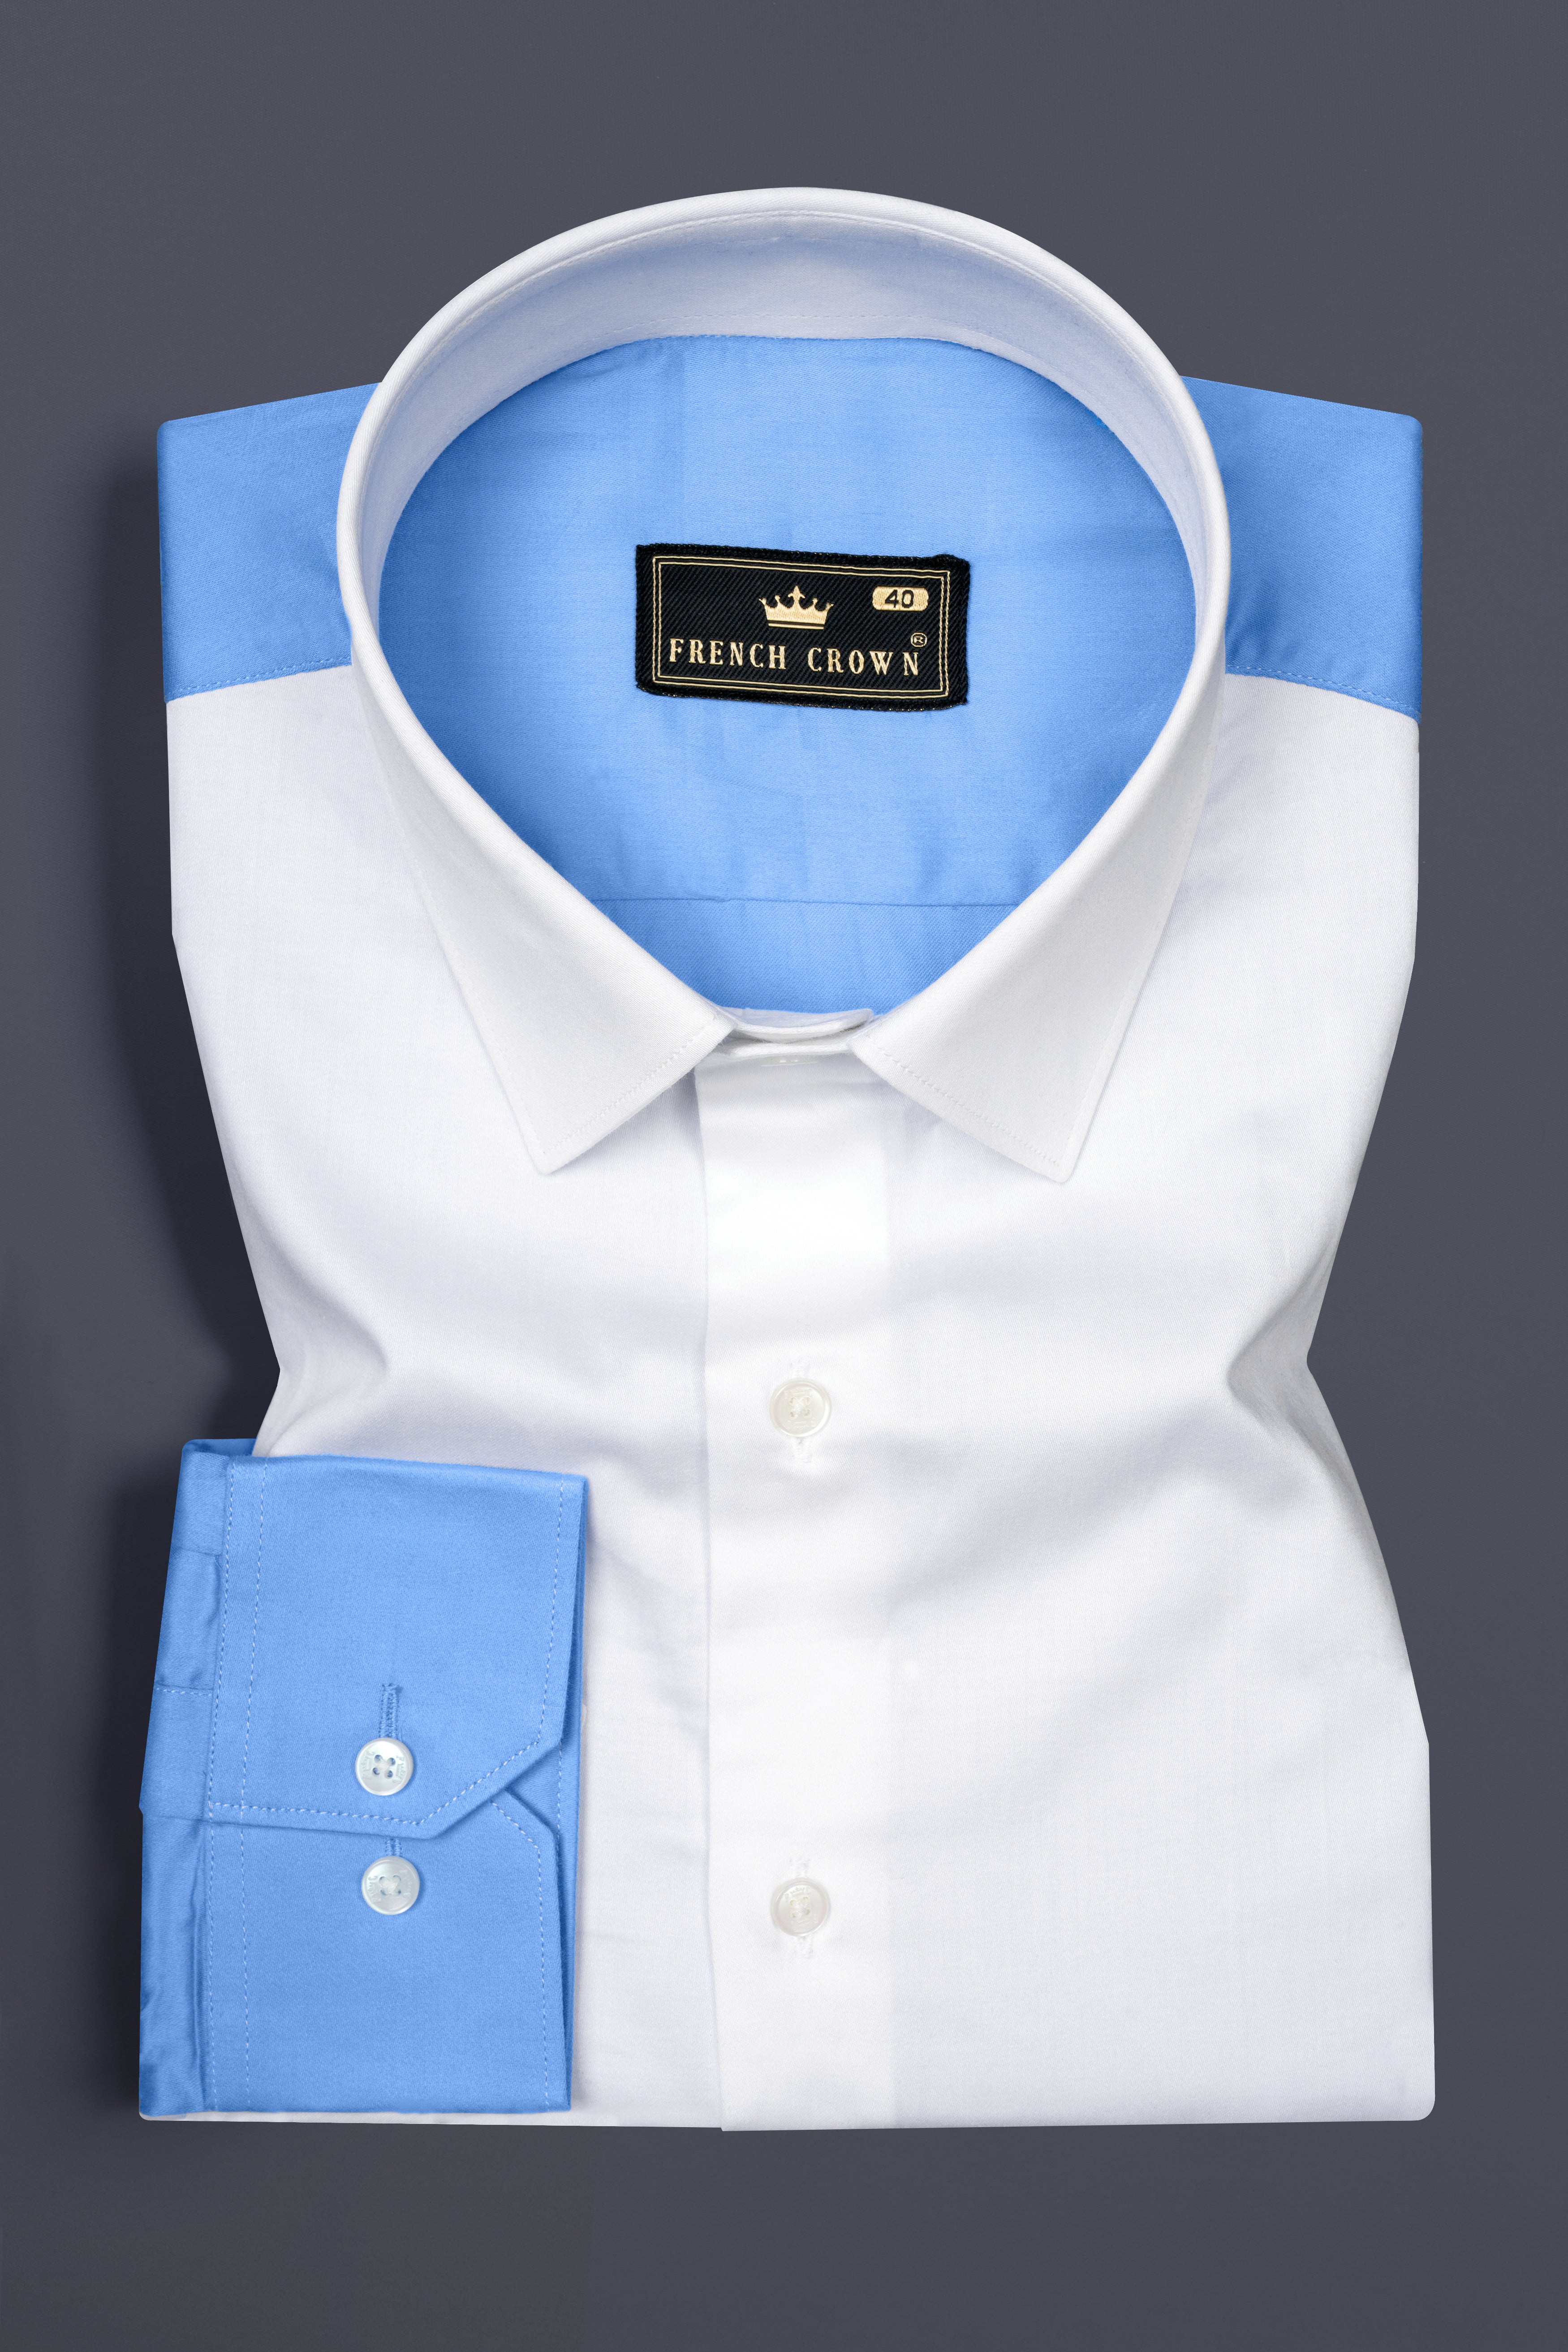 White with Periwinkle Blue Patches Super Soft Premium Cotton Shirt